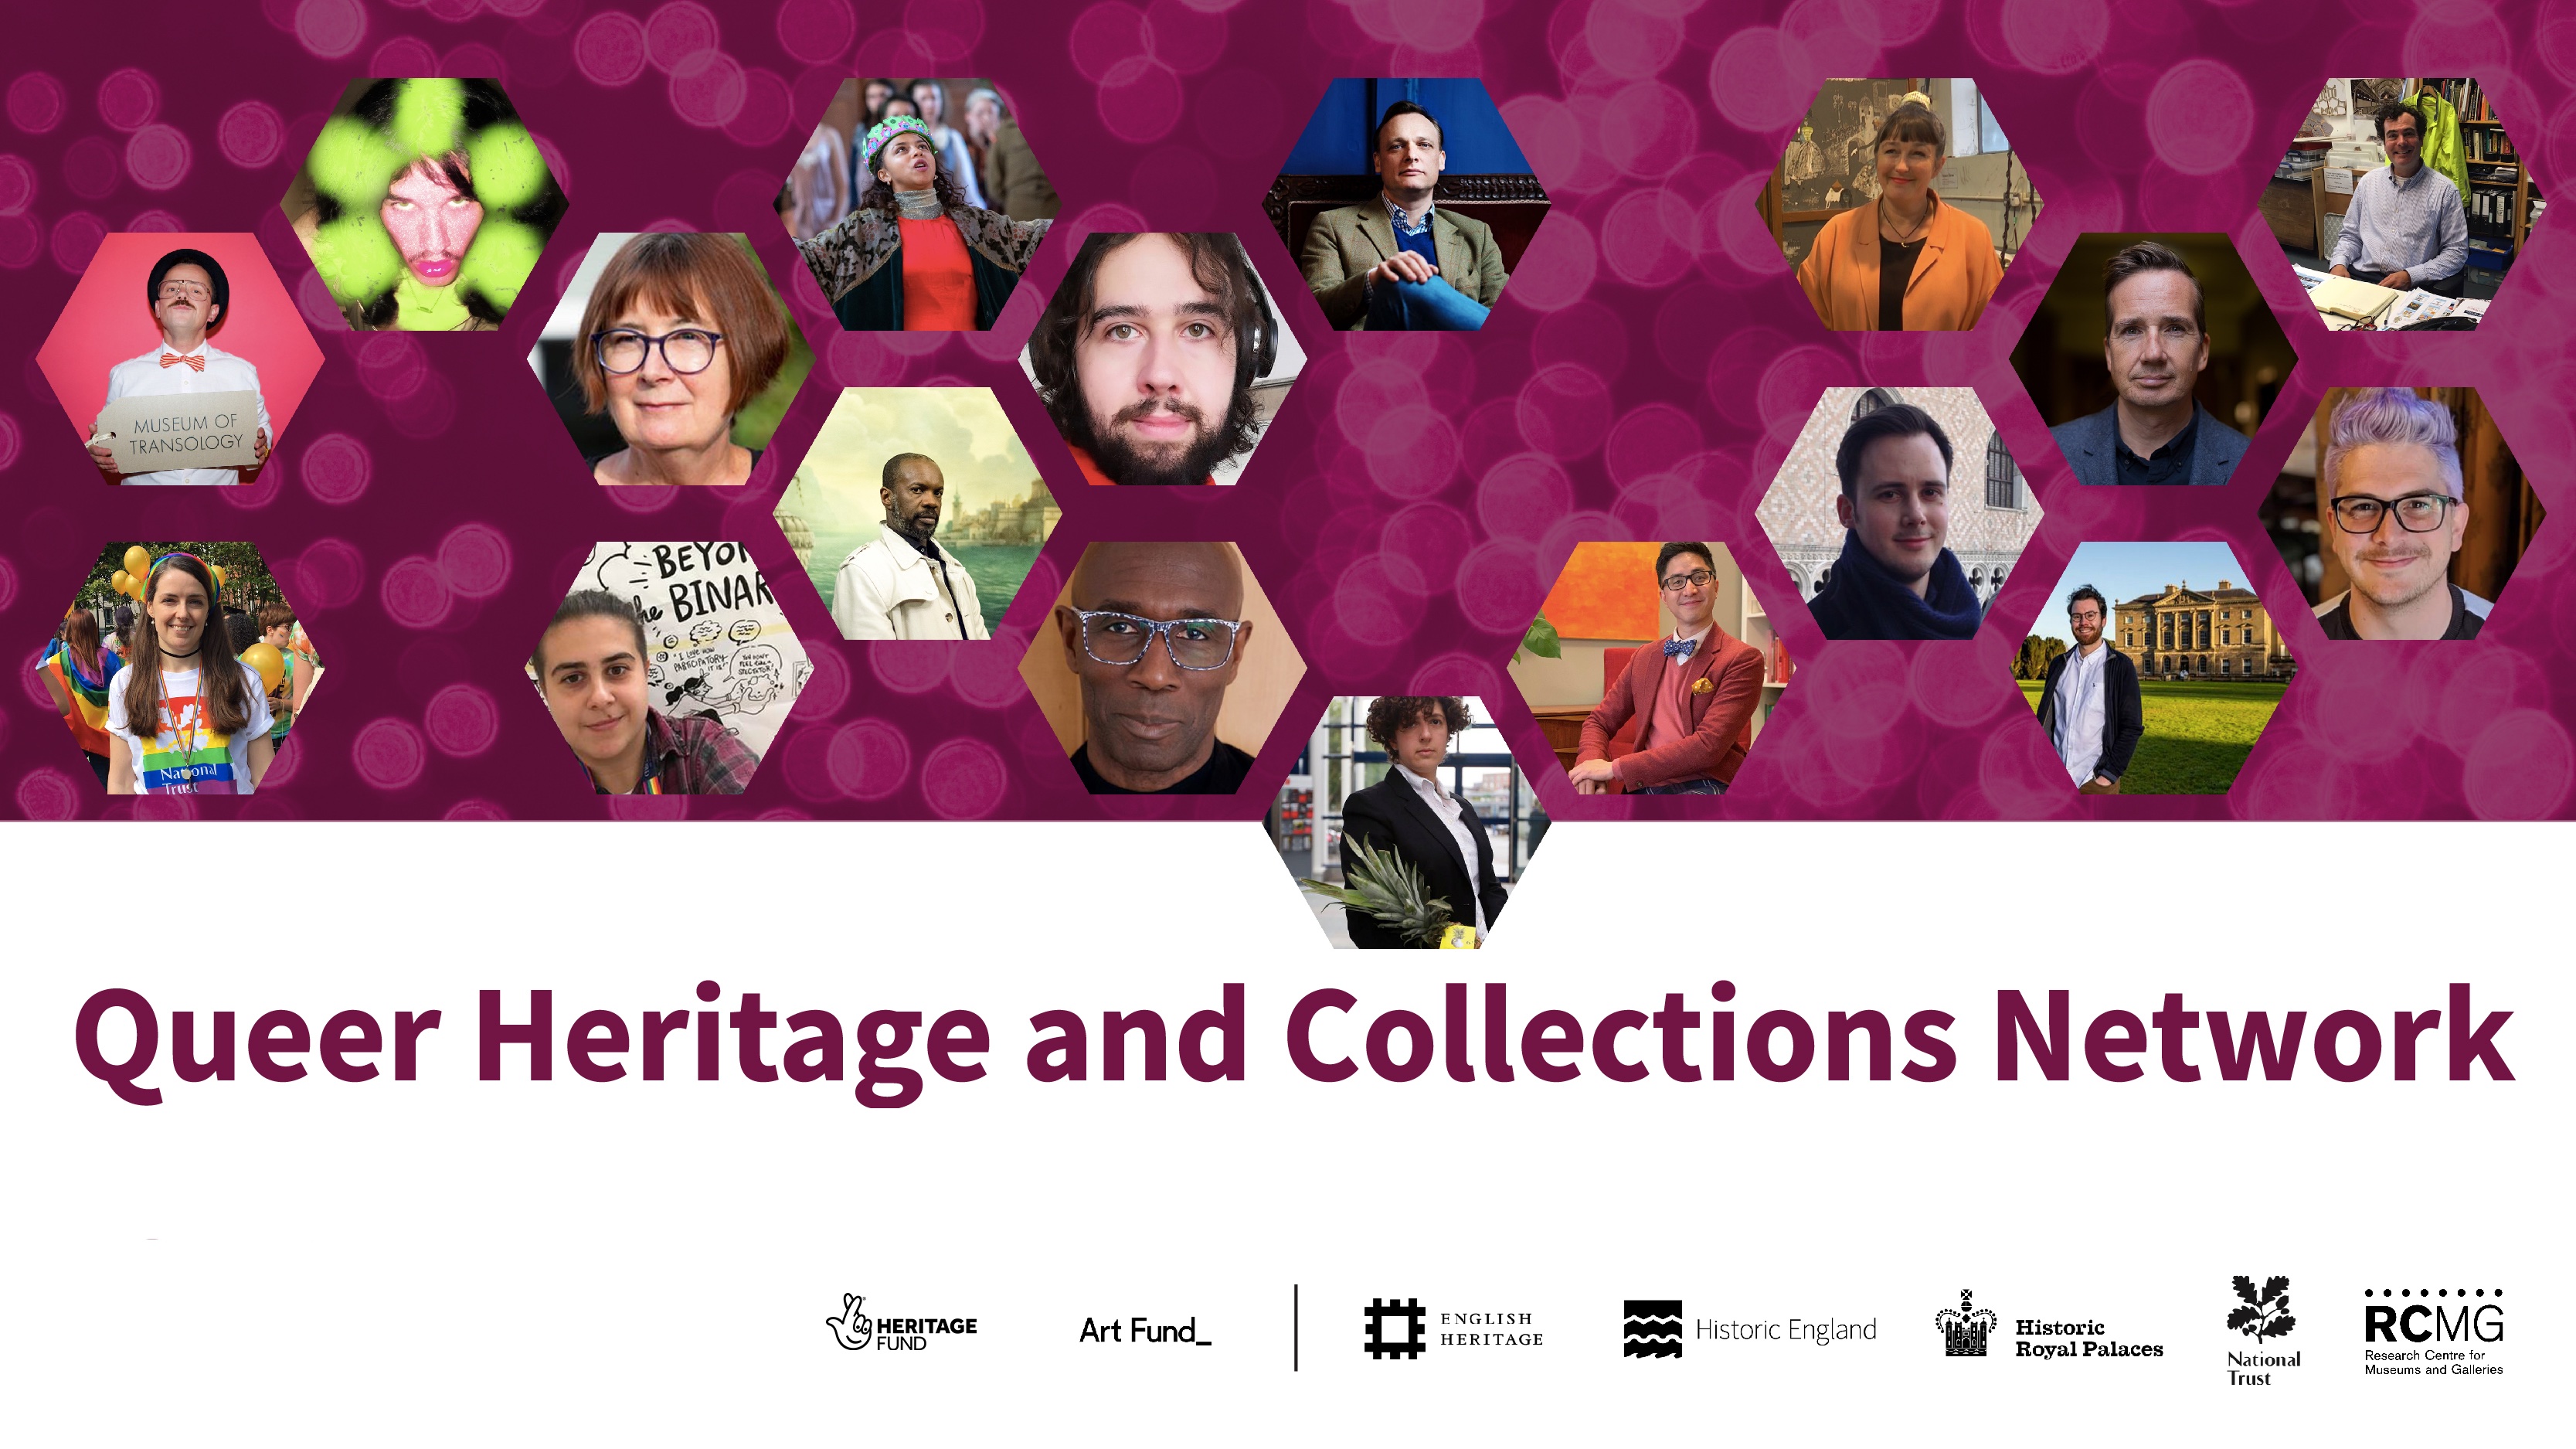 Presentation slide with purple background that says 'Queer Heritage and Collections Network'. There are several hexagons filled with picture of the people involved in the network.